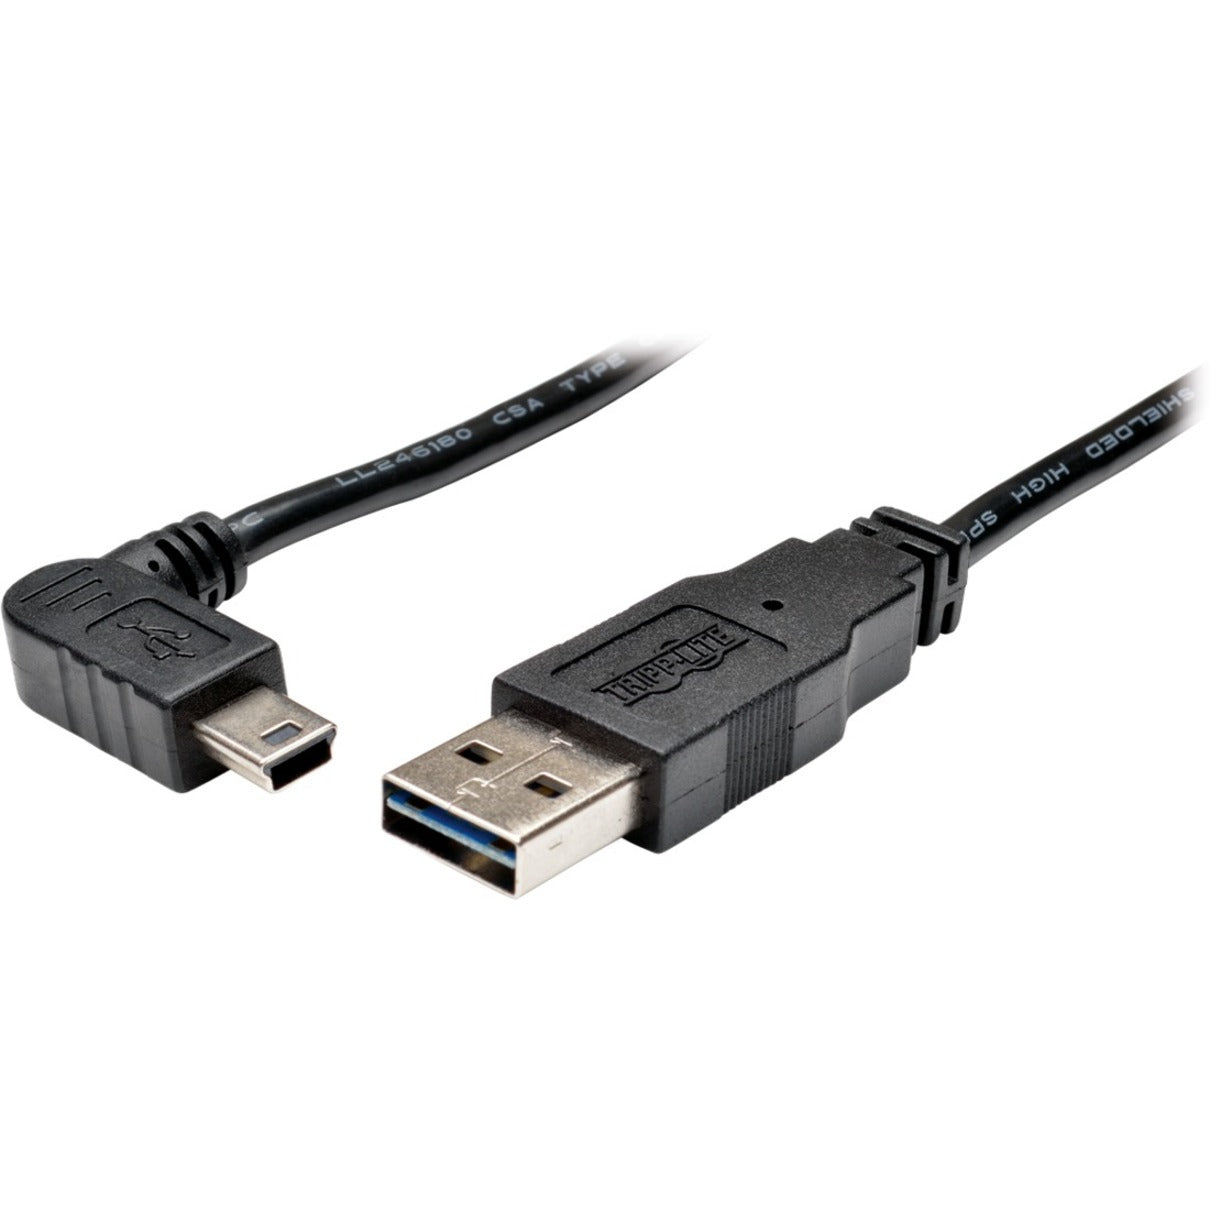 Tripp Lite UR030-003-RAB USB Data Transfer Cable, 3 ft, Molded, Right-Angle Connector, Reversible, Black